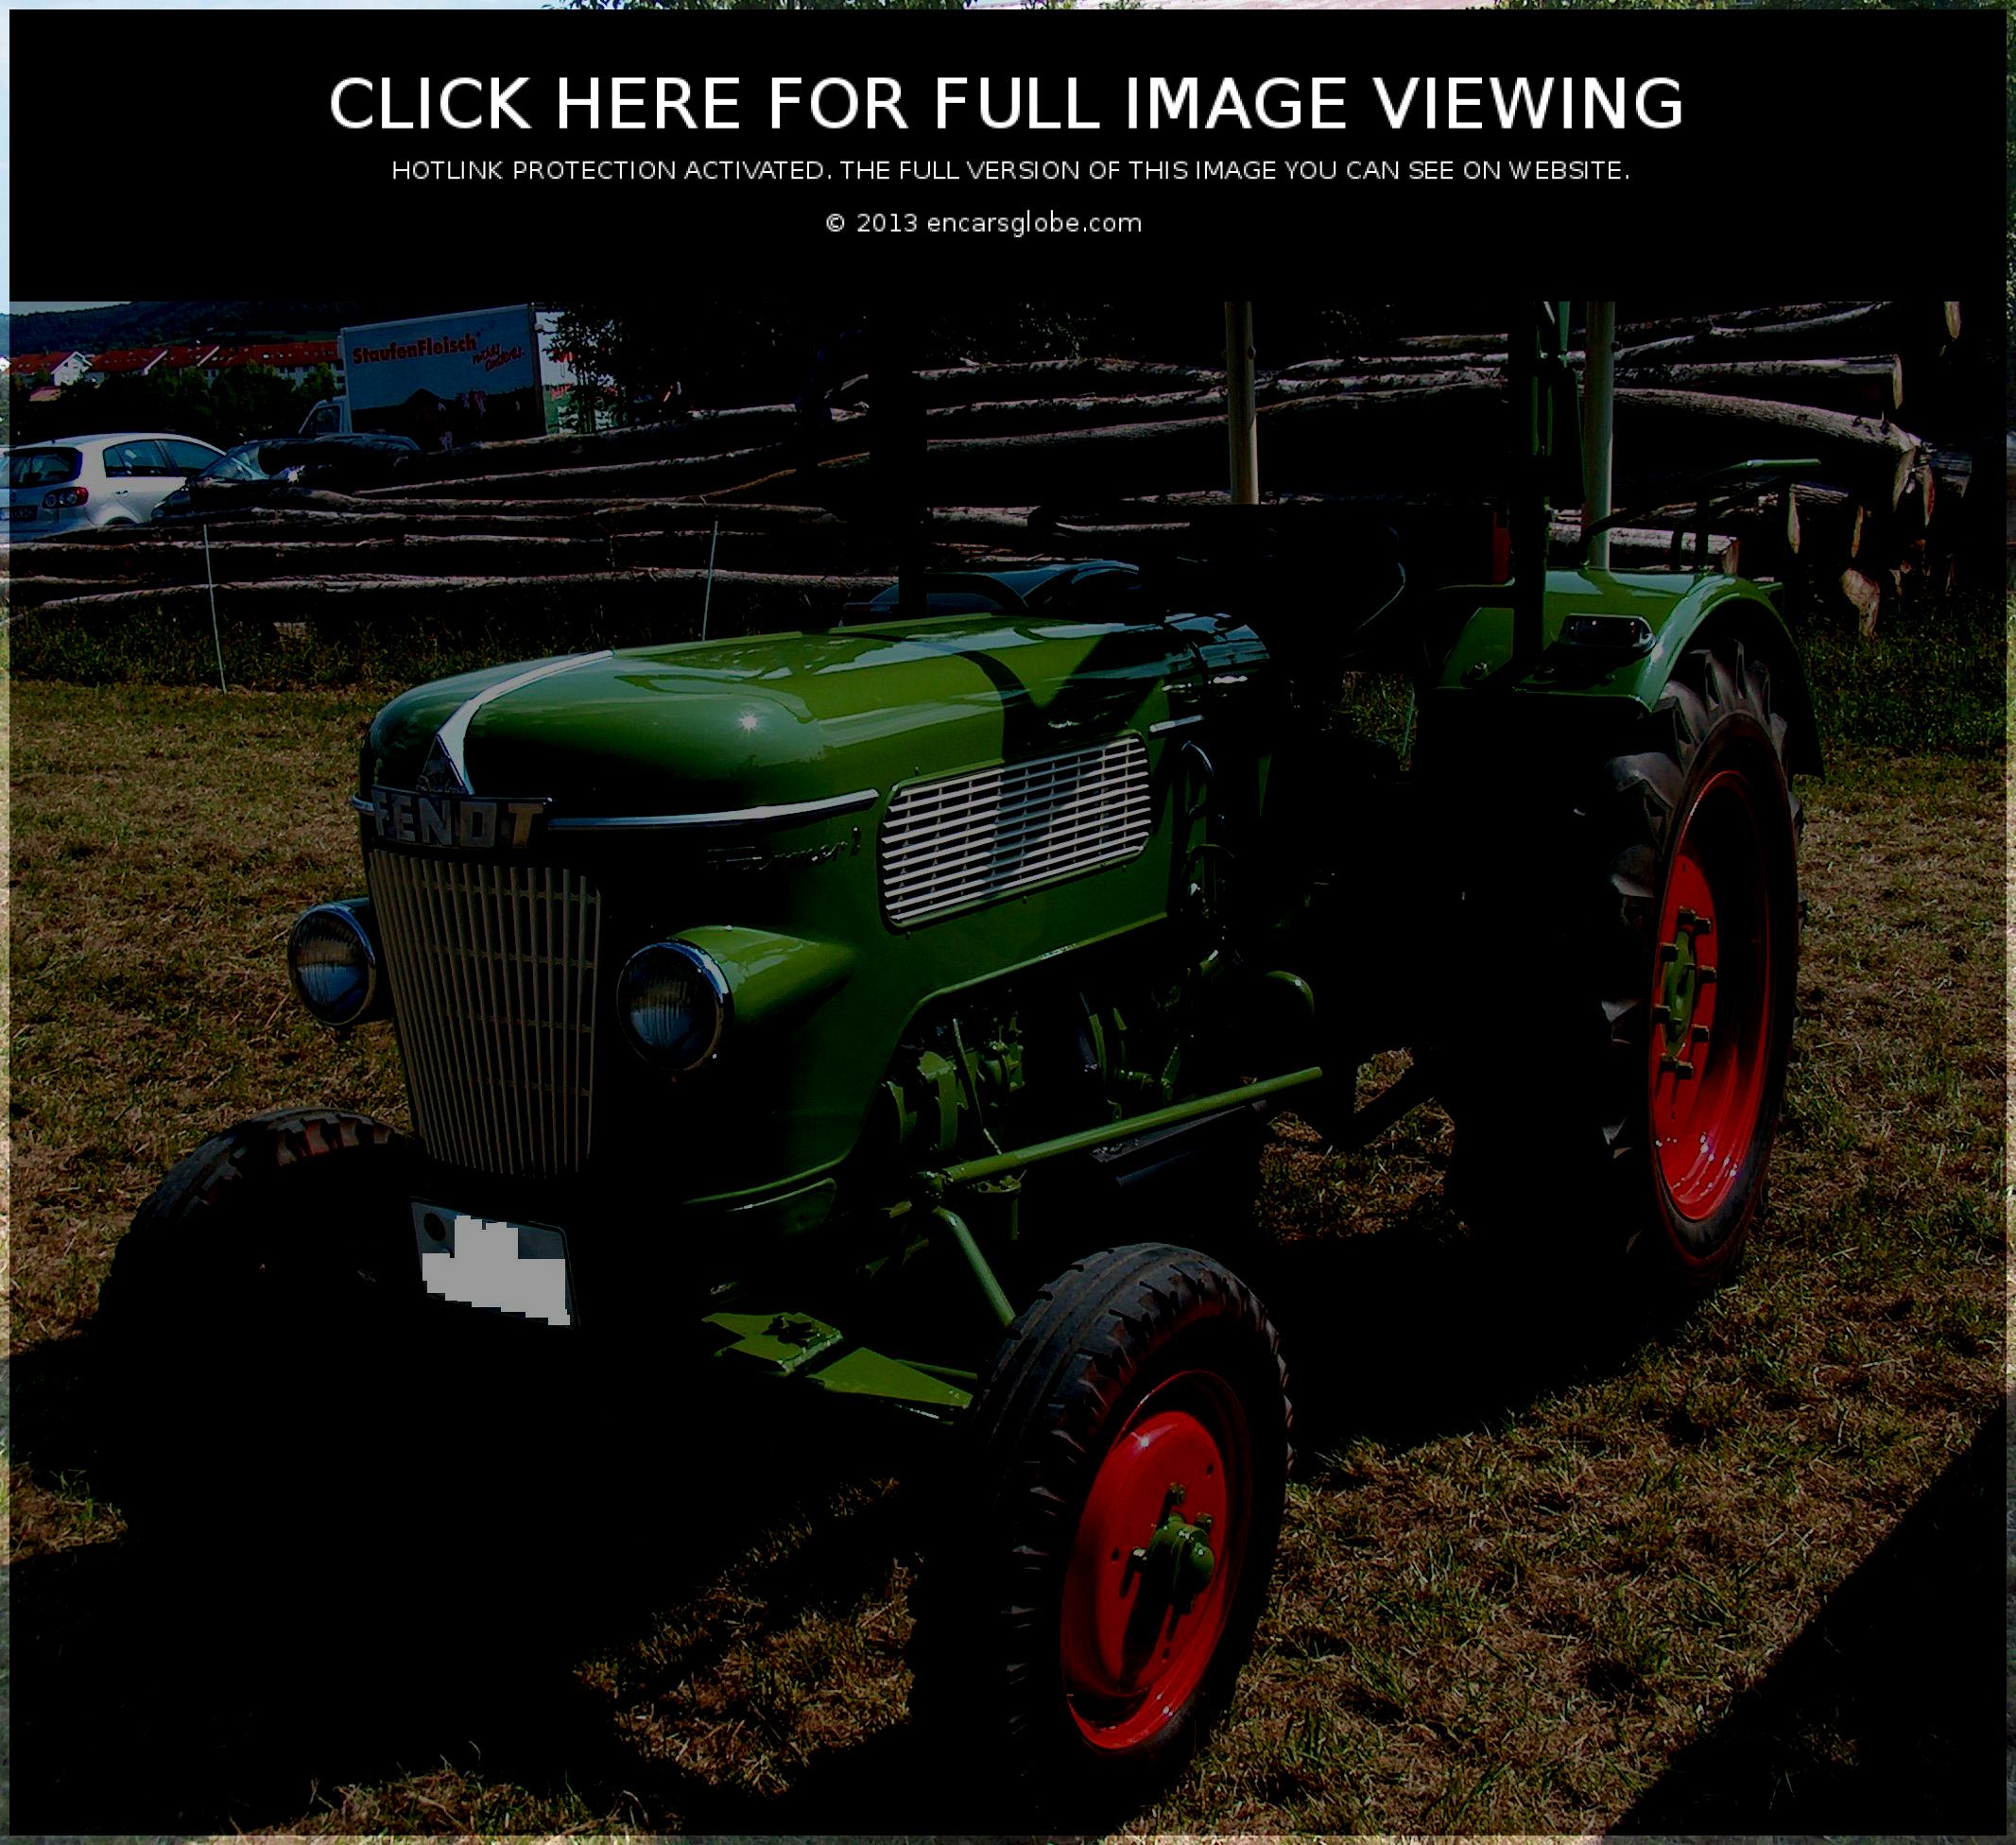 Fendt 756 Photo Gallery: Photo #04 out of 5, Image Size - 400 x 300 px